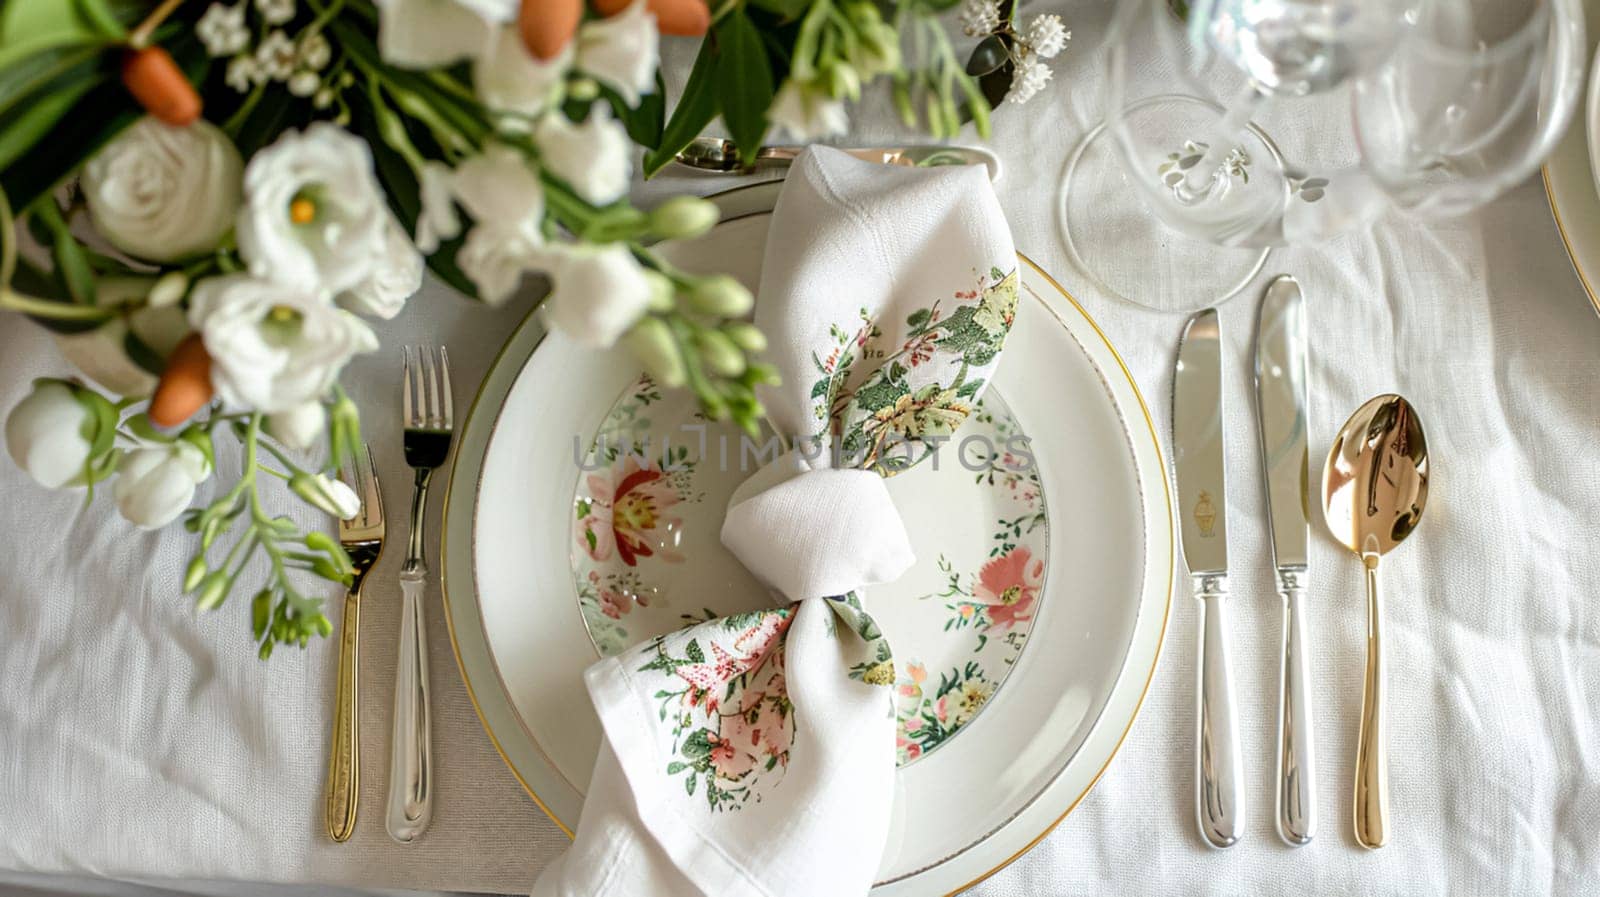 Easter table setting with painted eggs, spring flowers and crockery. Rustic style, selective focus